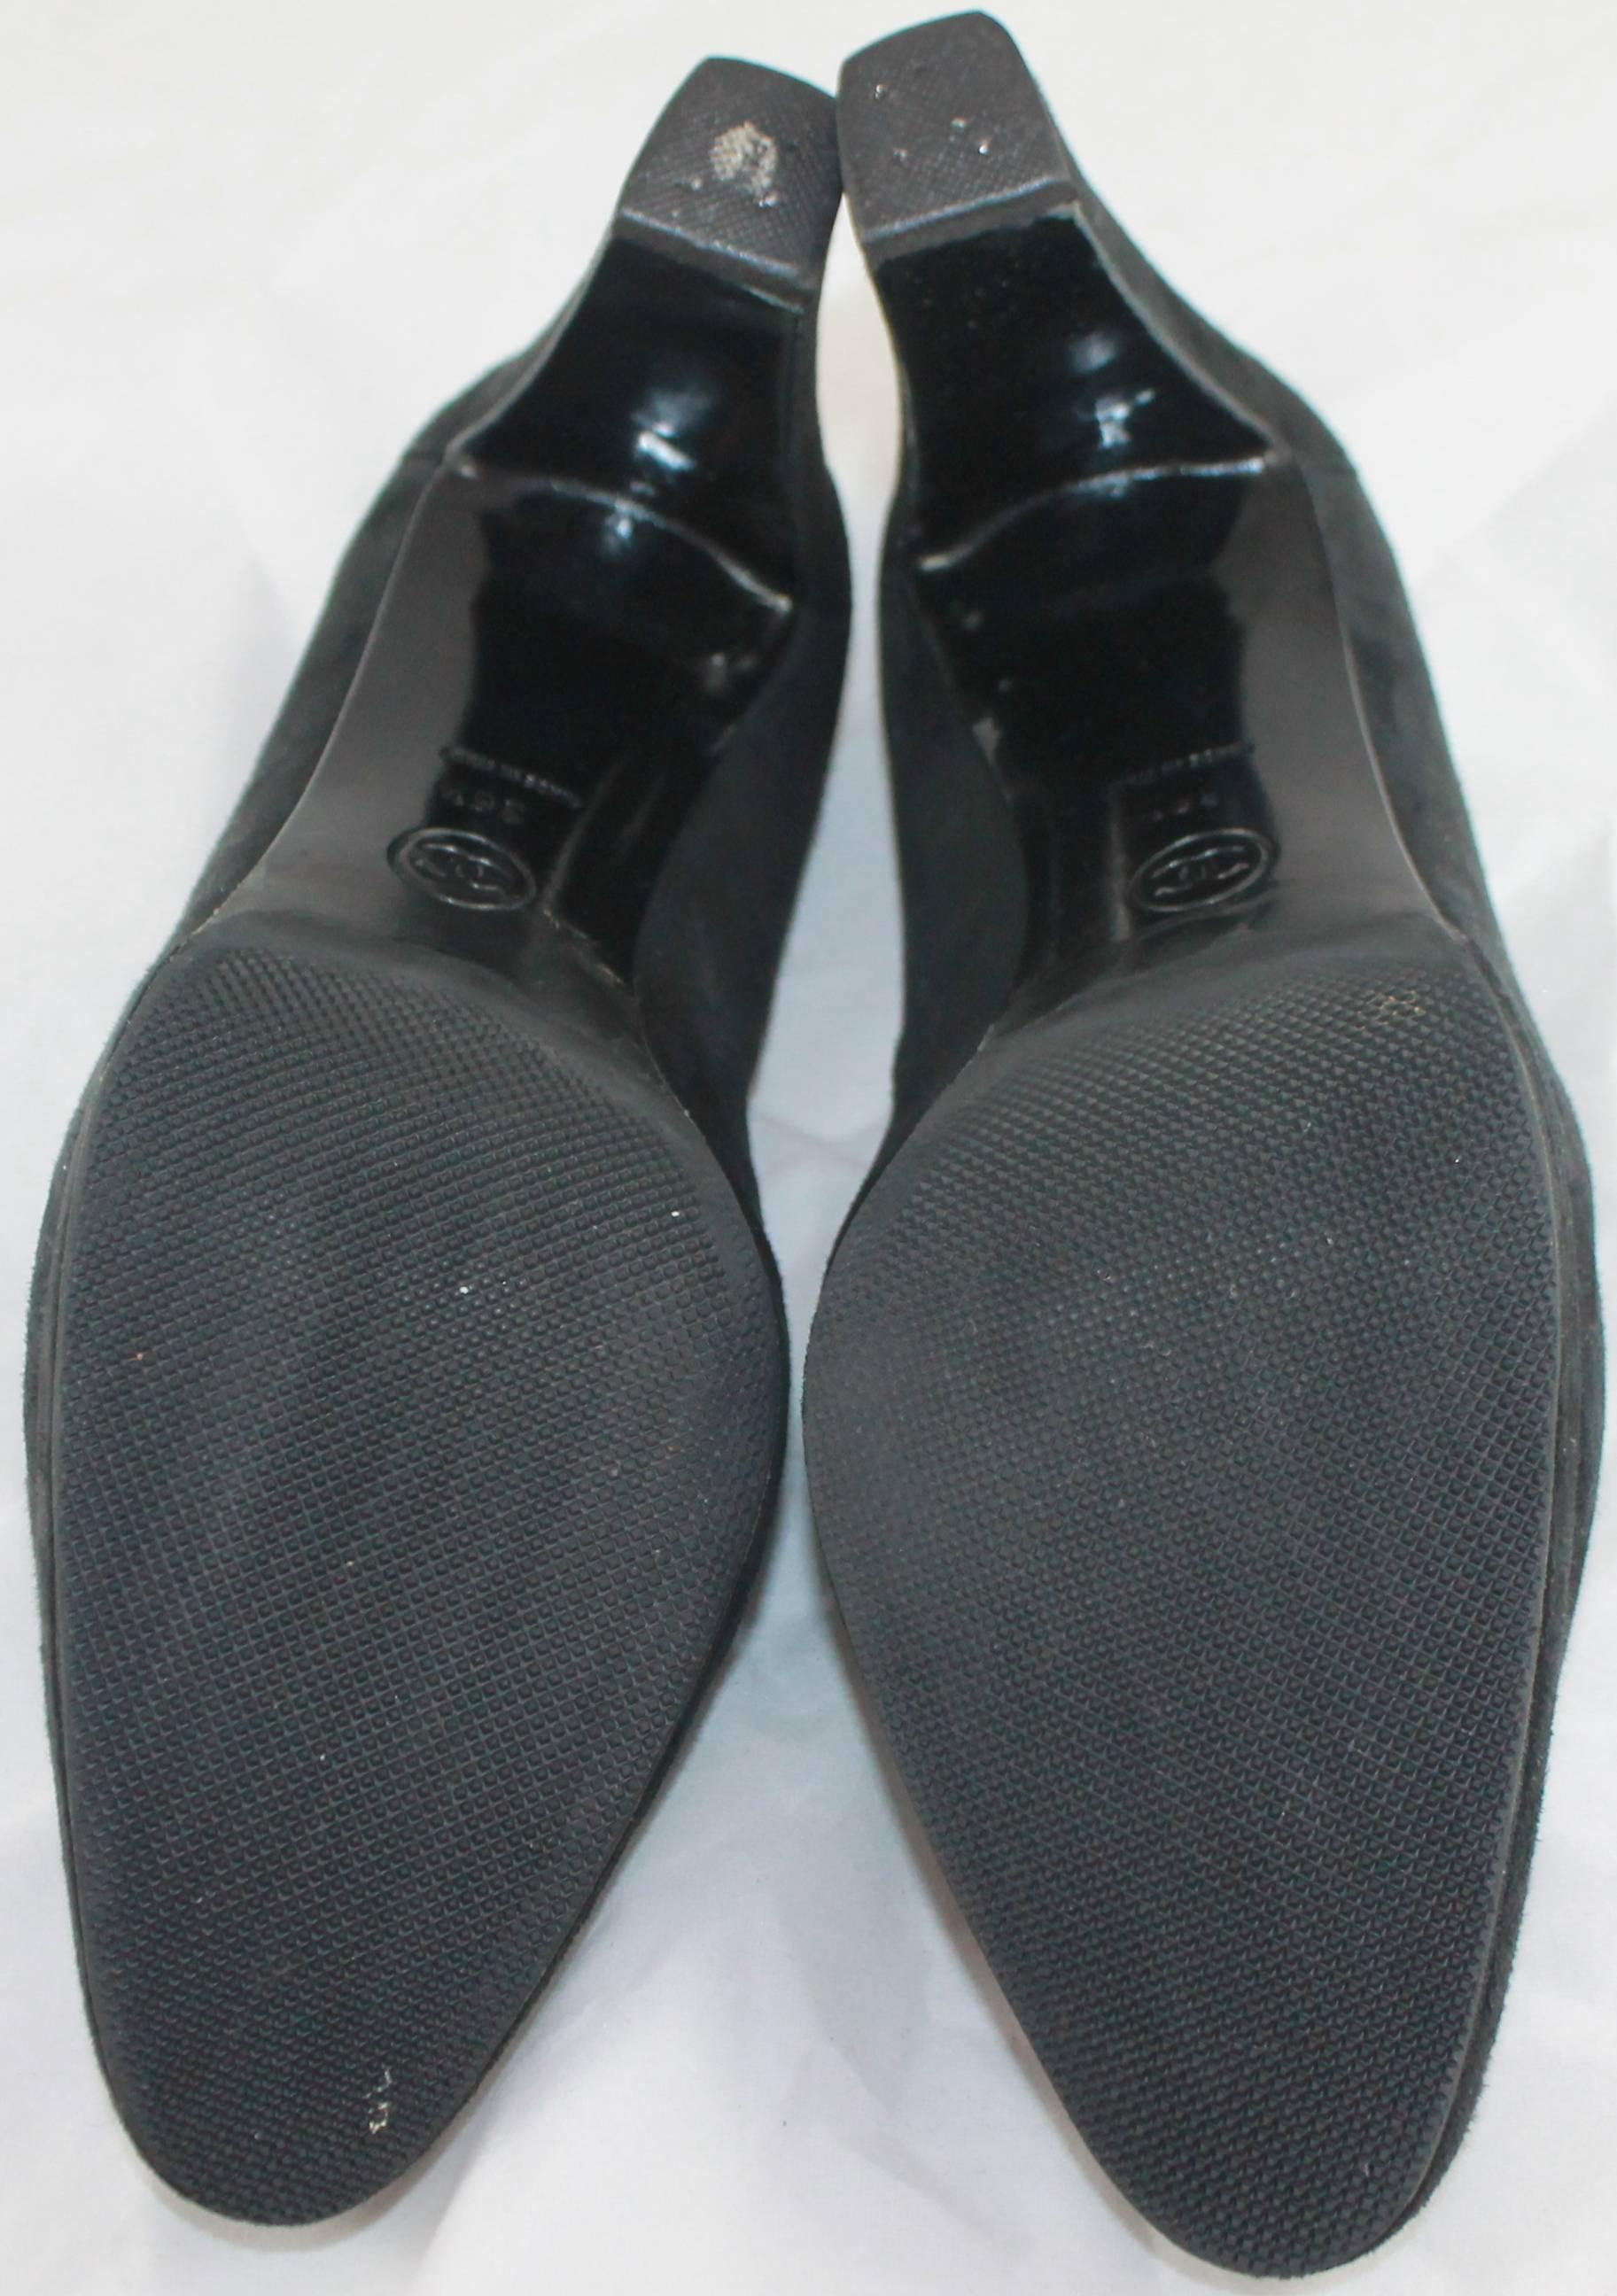 Chanel Black Suede Loafer Style Pumps - 36.5 4